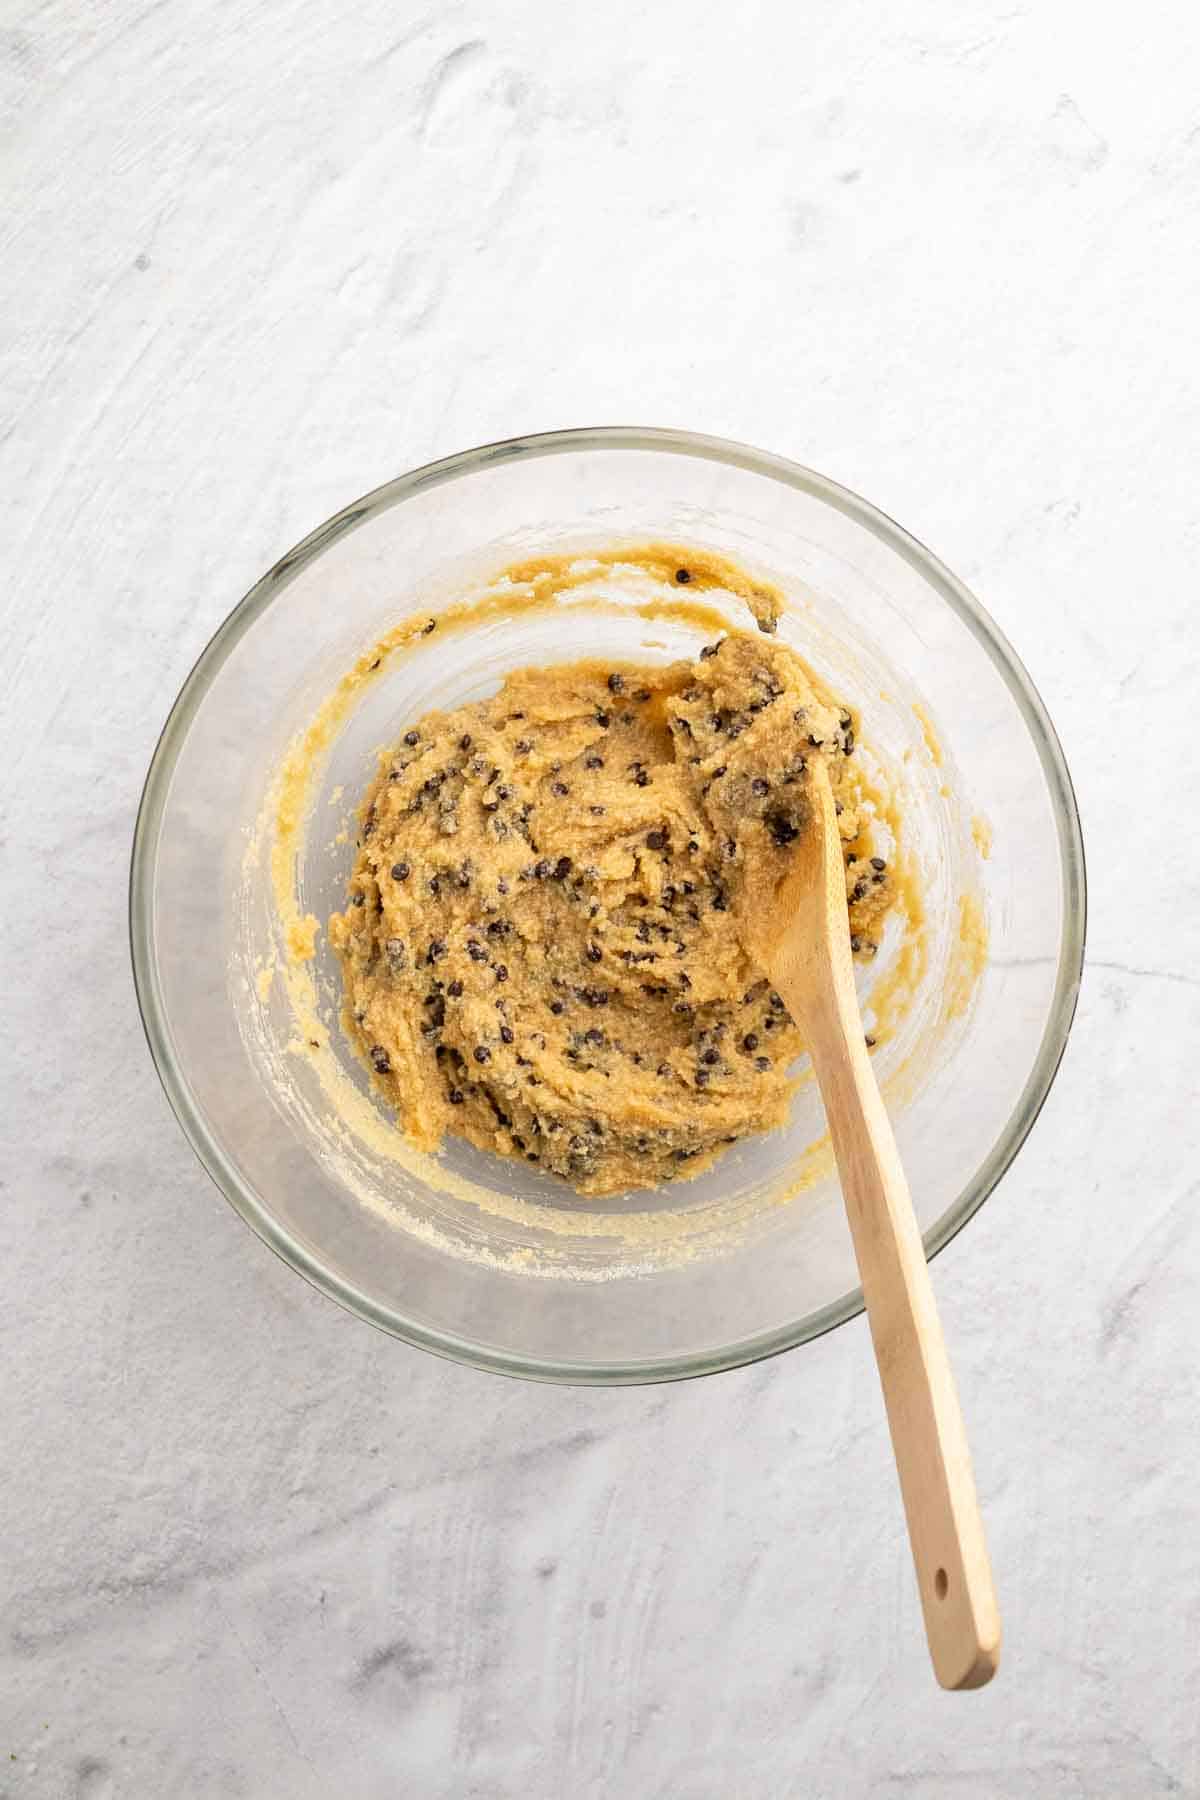 Chocolate chips folded in to the cookie dough in a glass bowl with a wooden spoon, as seen from above